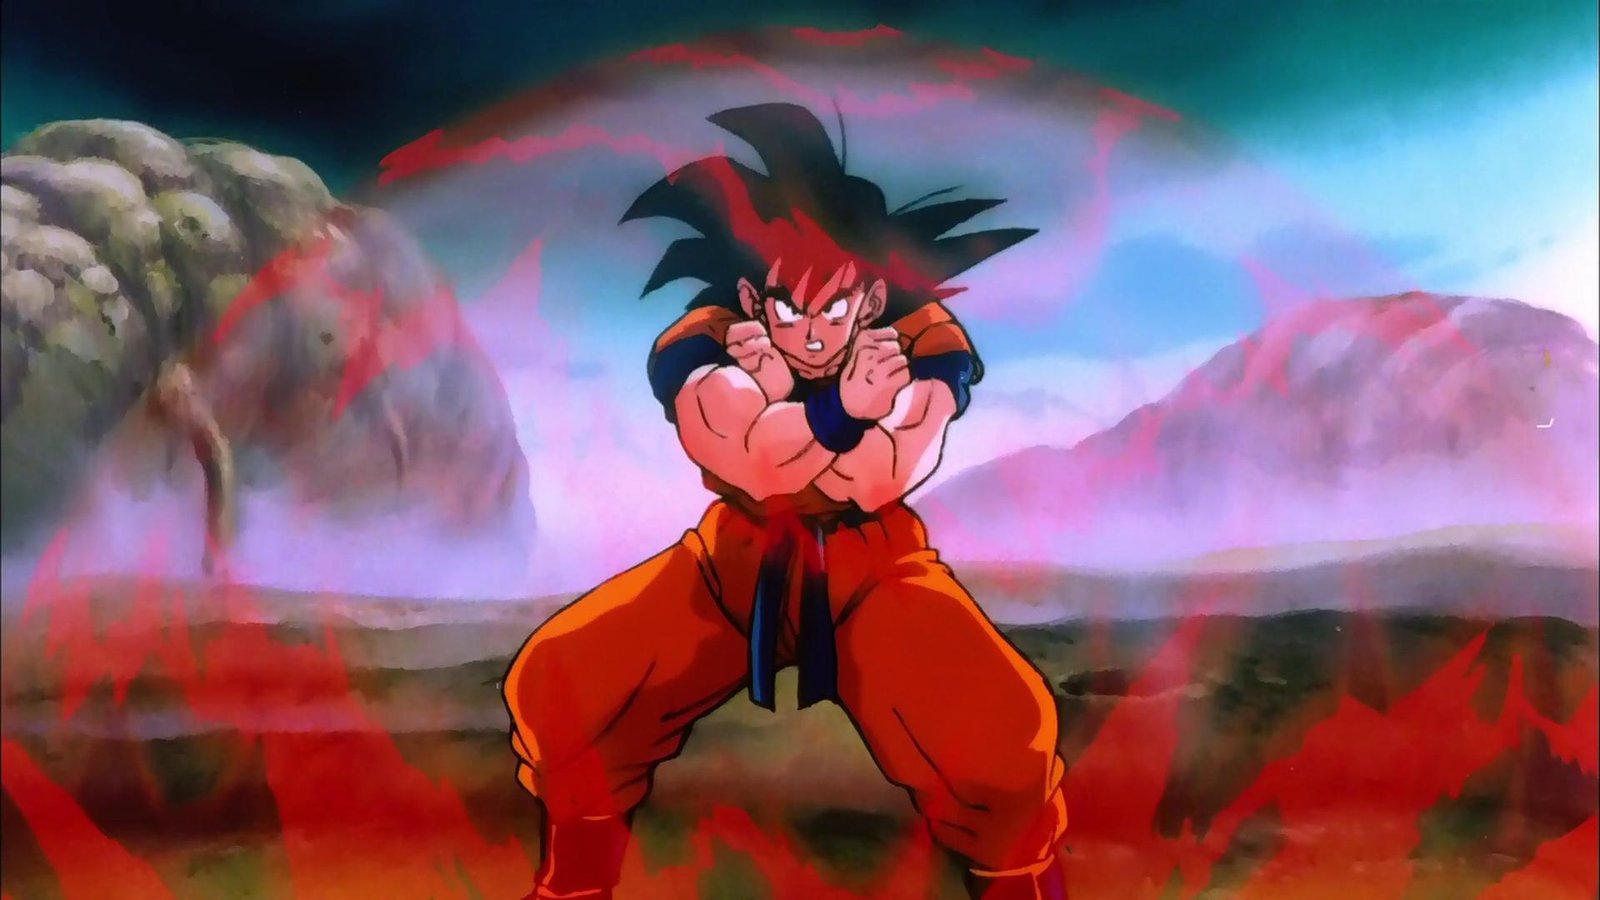 Dragon ball movies in order: Dragon Ball Z: The Tree Of Might